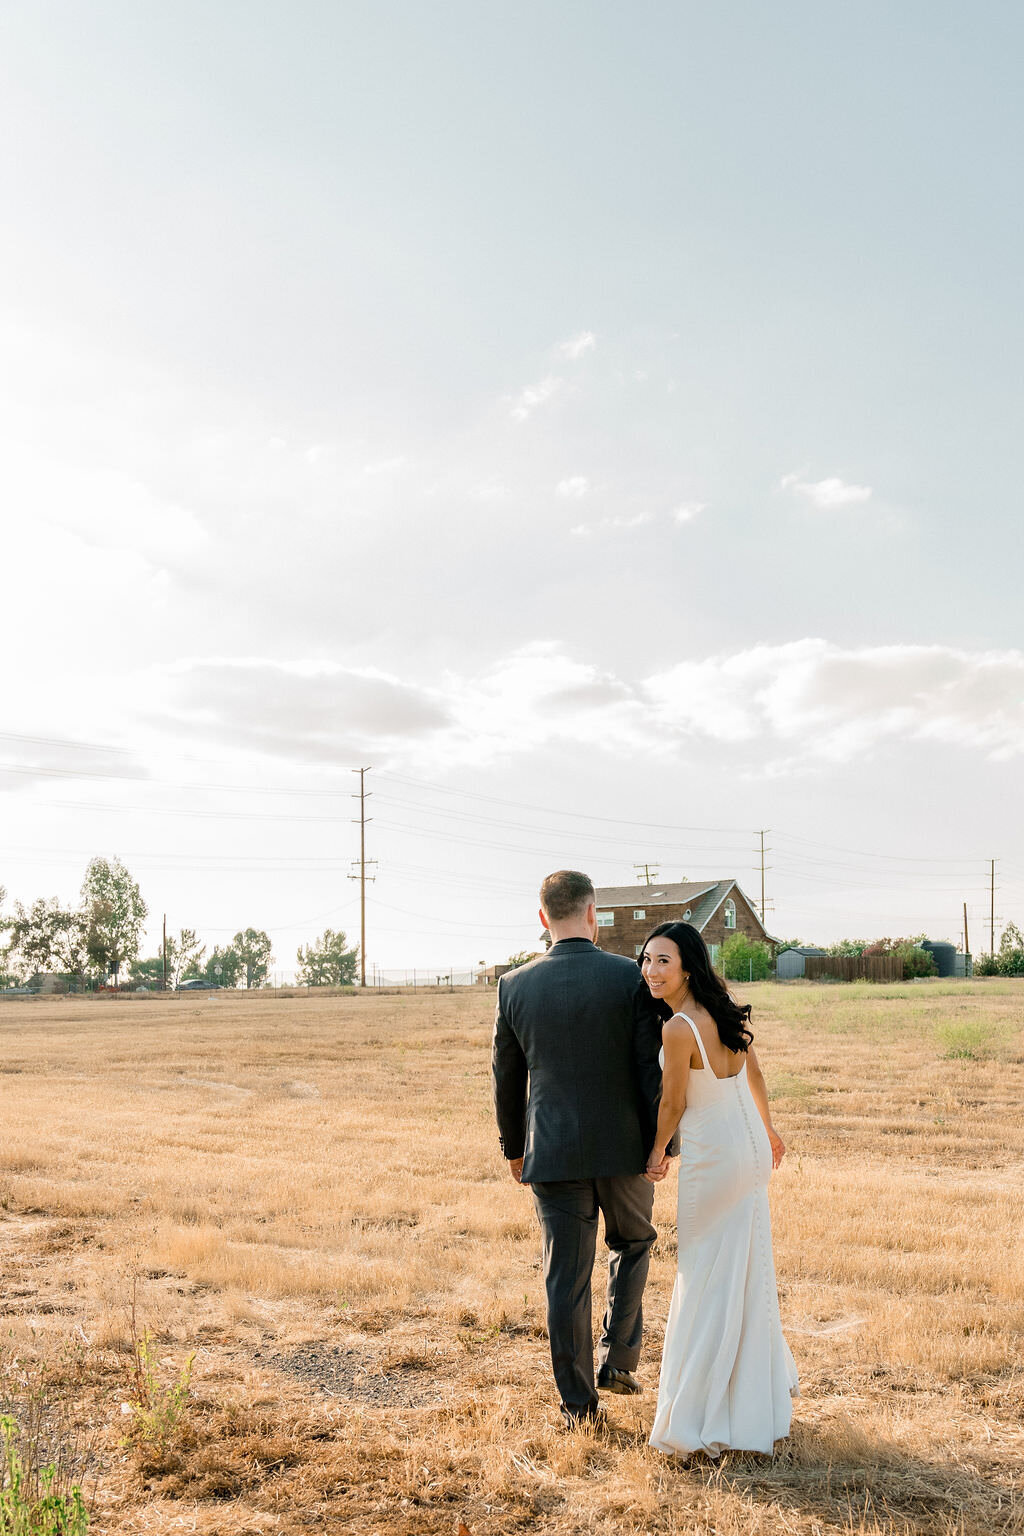 couple walking in a field as the bride looks back over her shoulder